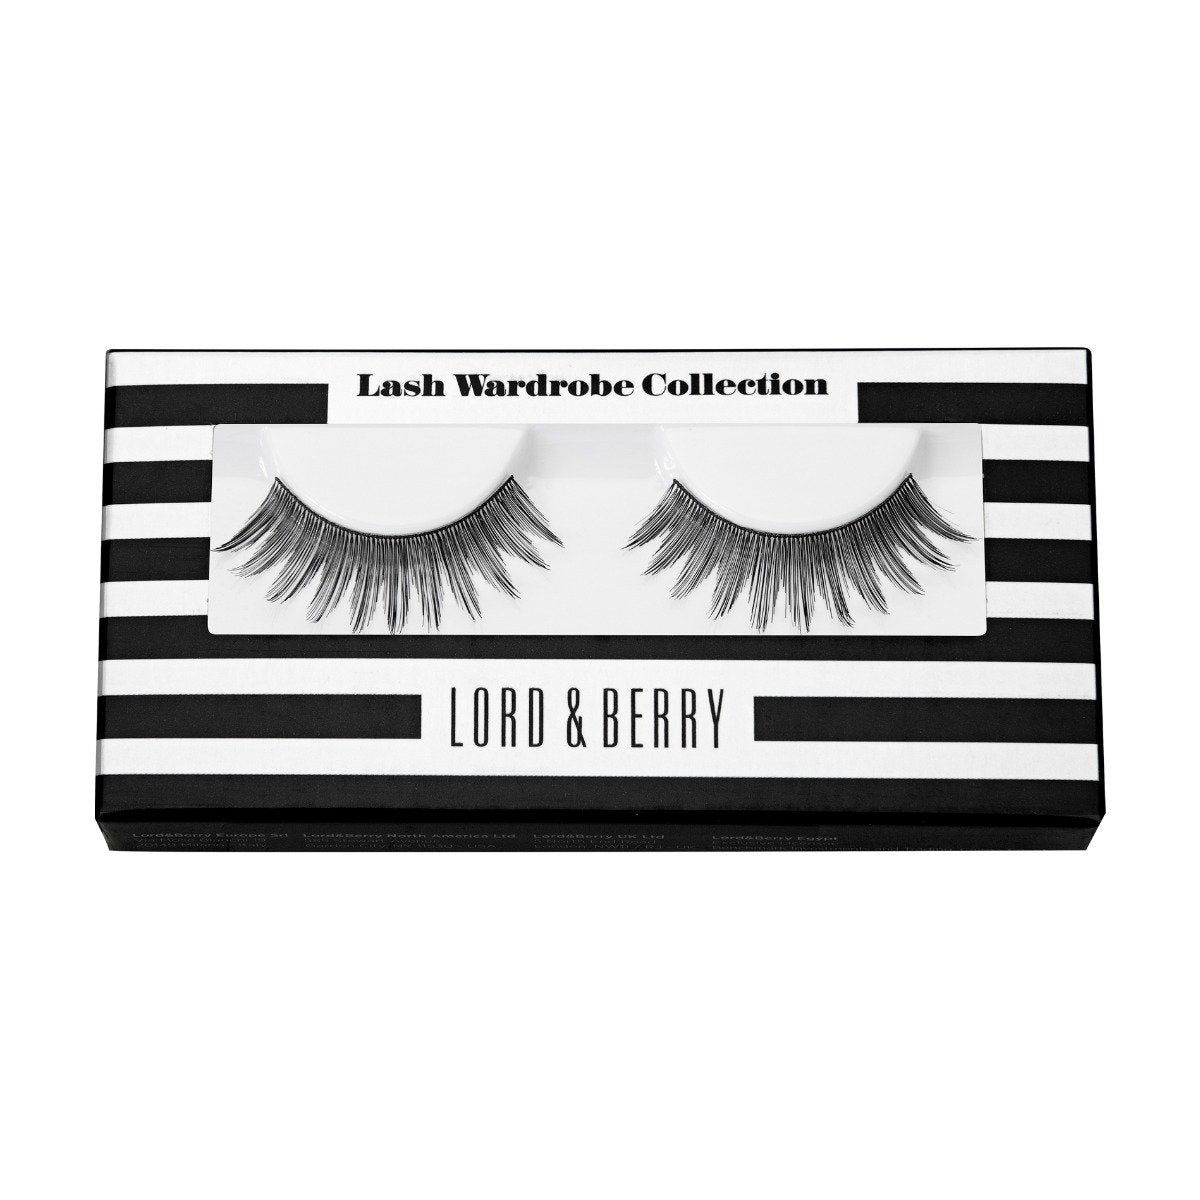 Lord & Berry Eyelashes Wardrobe Collection - EL6 - Bloom Pharmacy